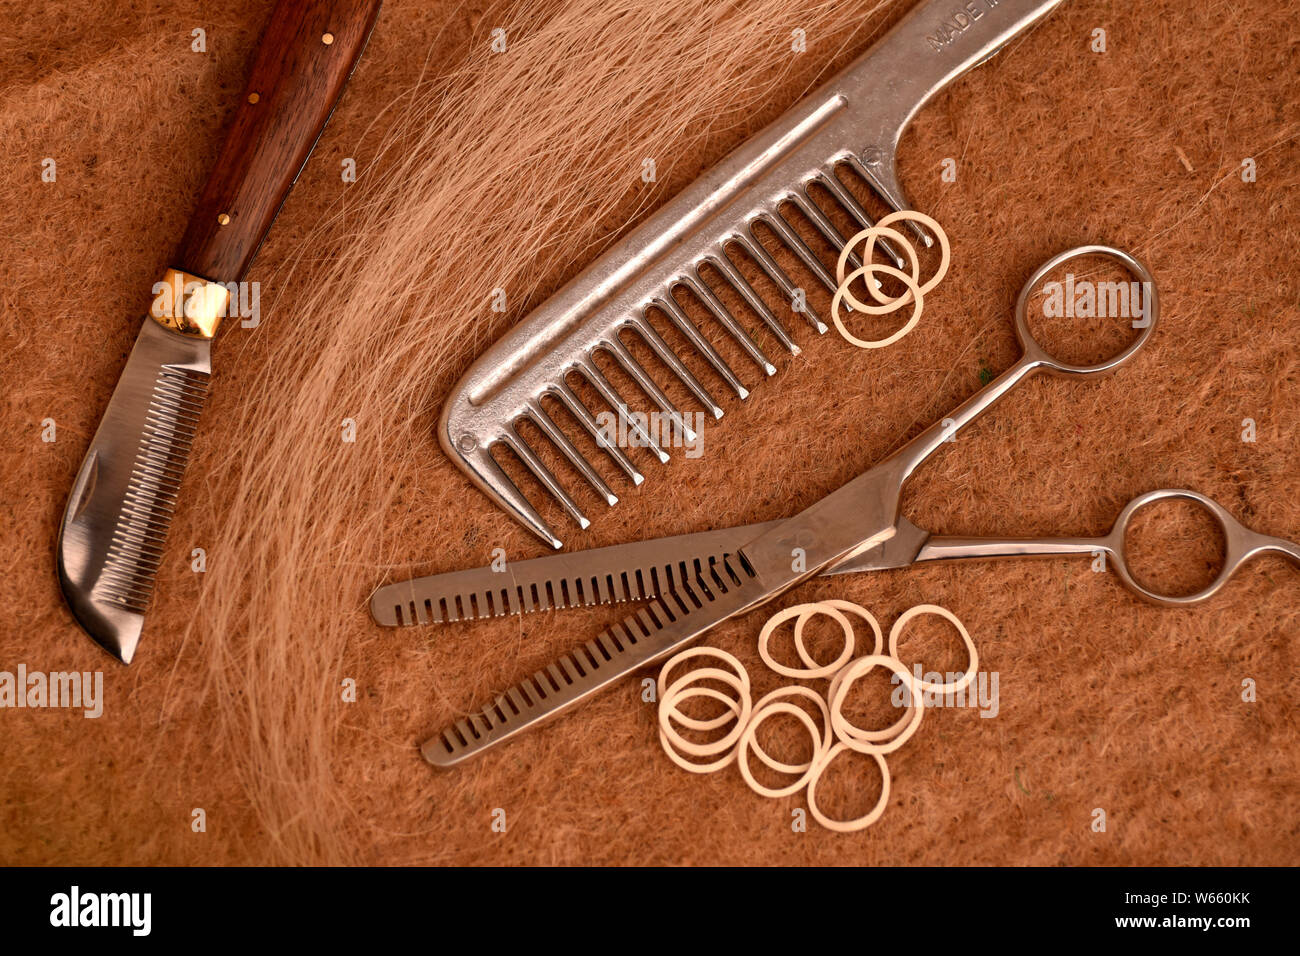 Equipment for horse grooming, thinning shears, thinning knive, rubber band, rubber bands Stock Photo